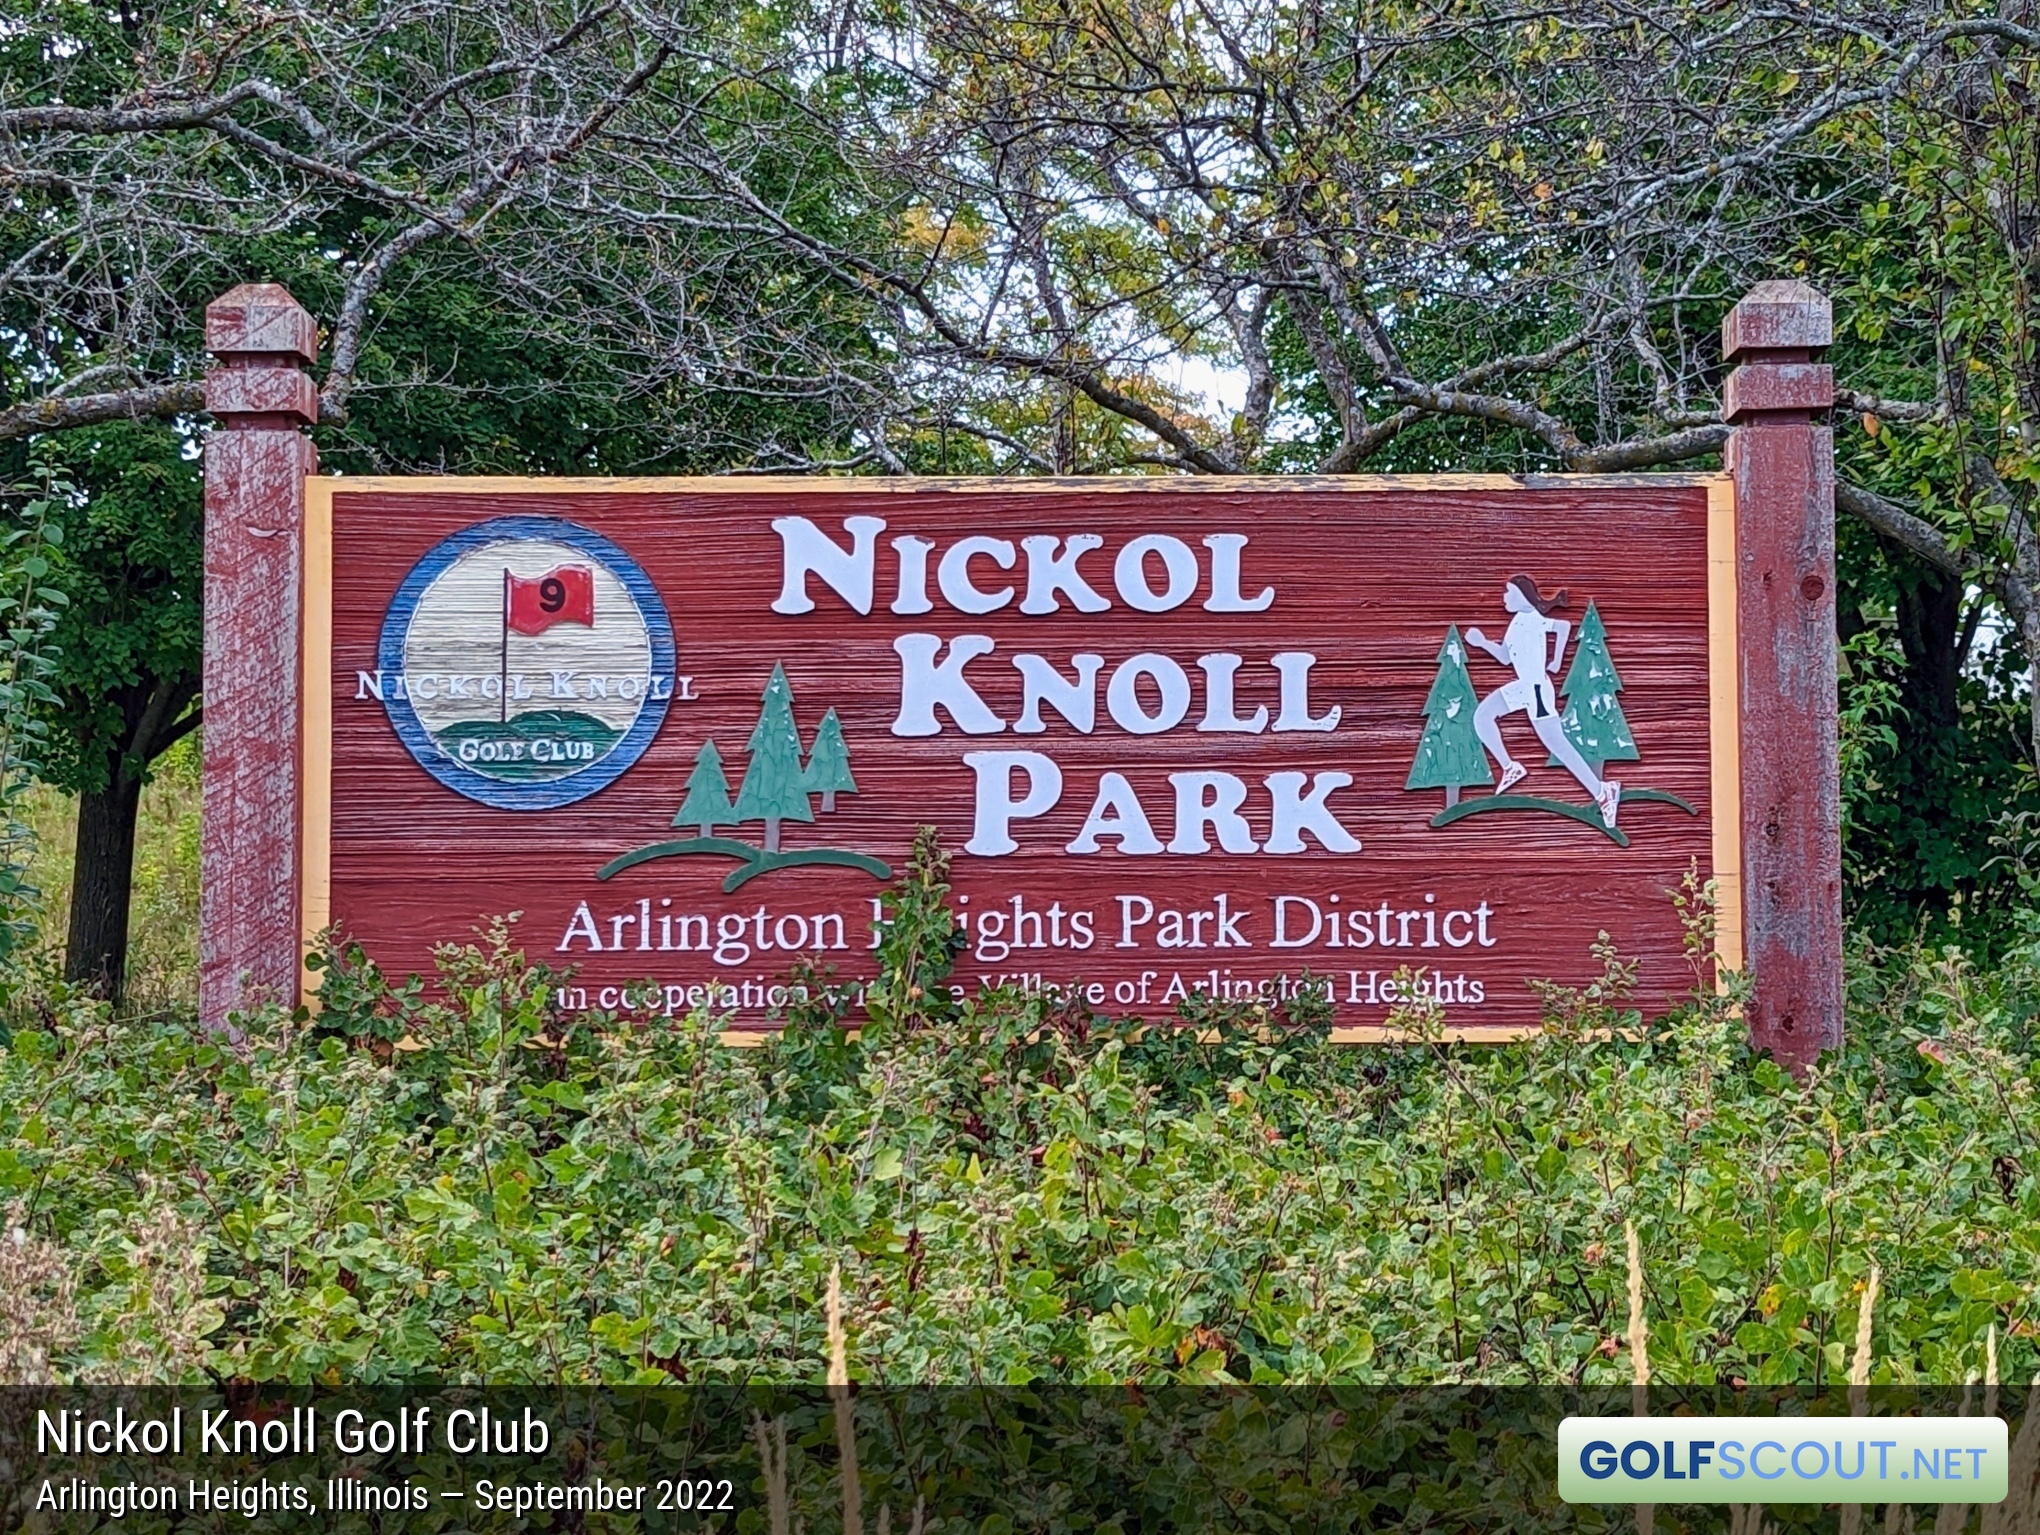 Sign at the entrance to Nickol Knoll Golf Club